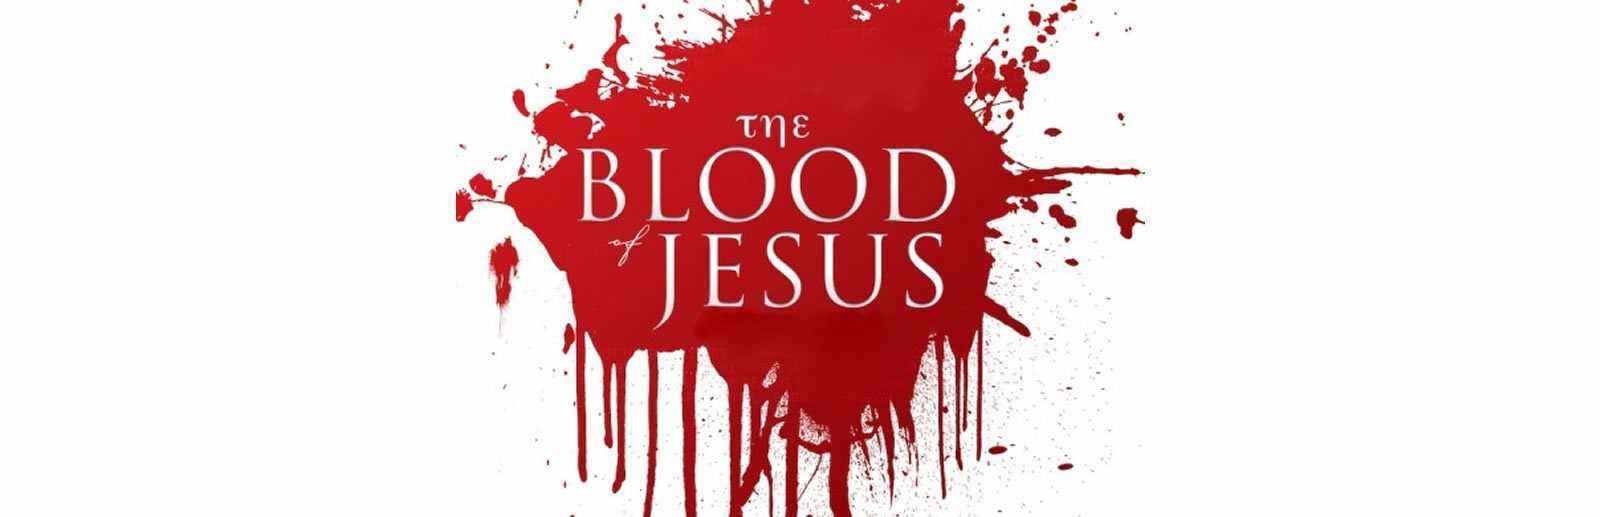 The blood of Jesus cleanses from Sins